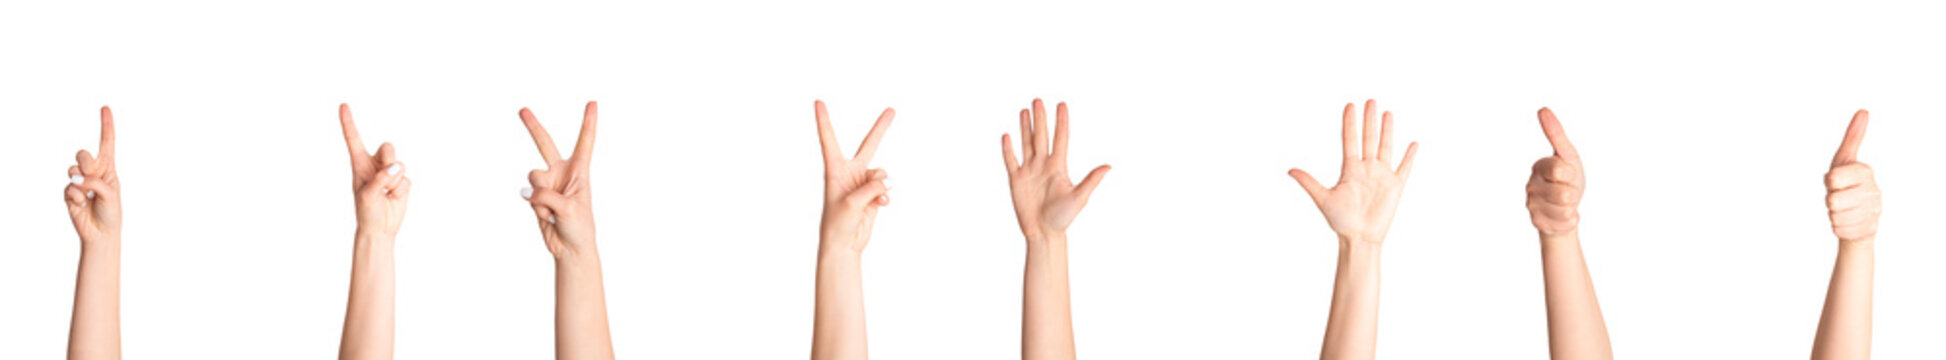 Set of female hands showing various gestures on white background, banner design. Collage